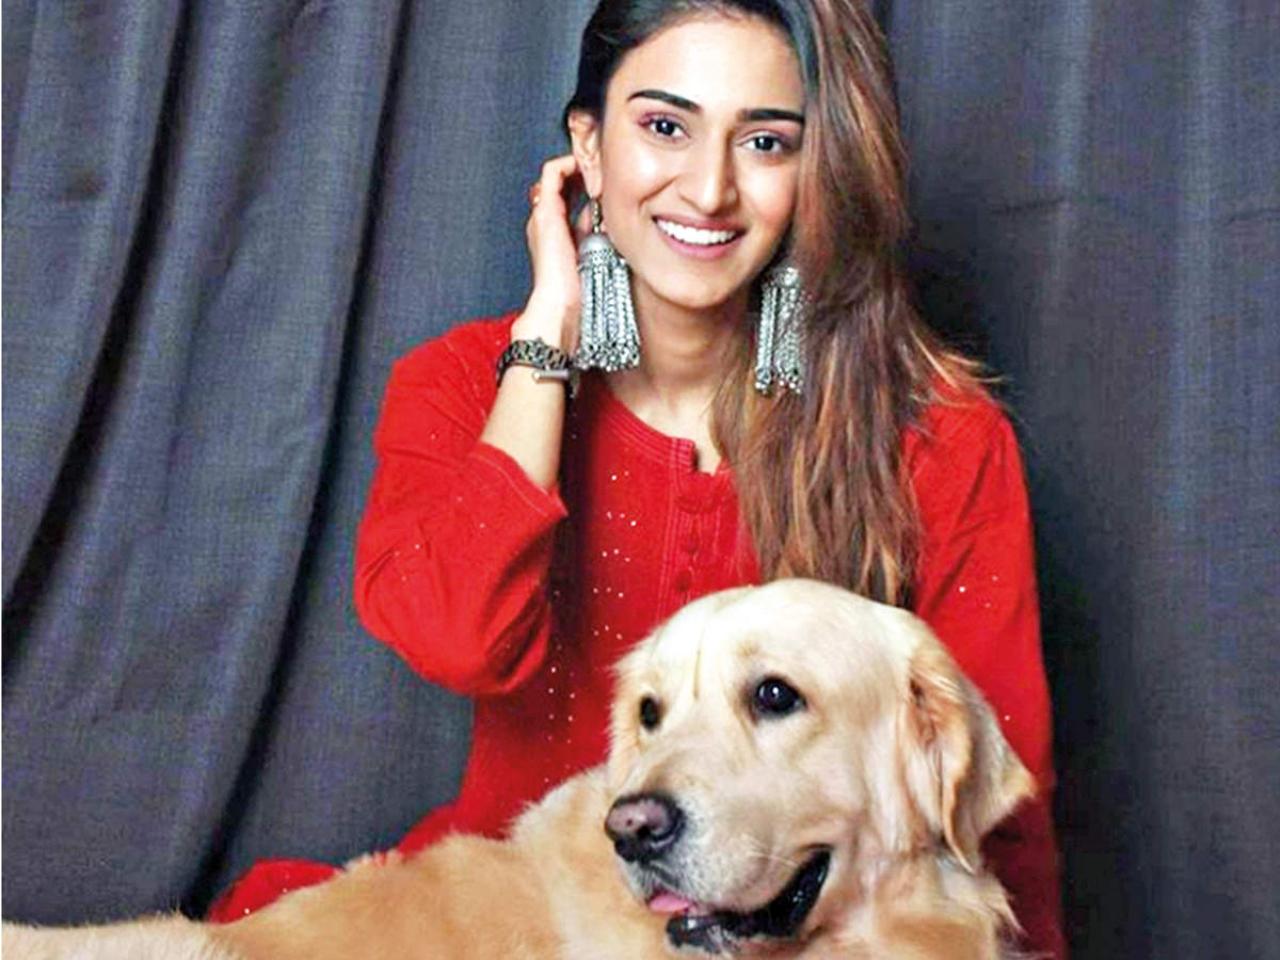 Erica Fernandes 
Erica cherishes the presence of her adorable dog, Champ, who has become her ultimate stress buster and closest companion. Aren't our furry friends always our closest confidantes?